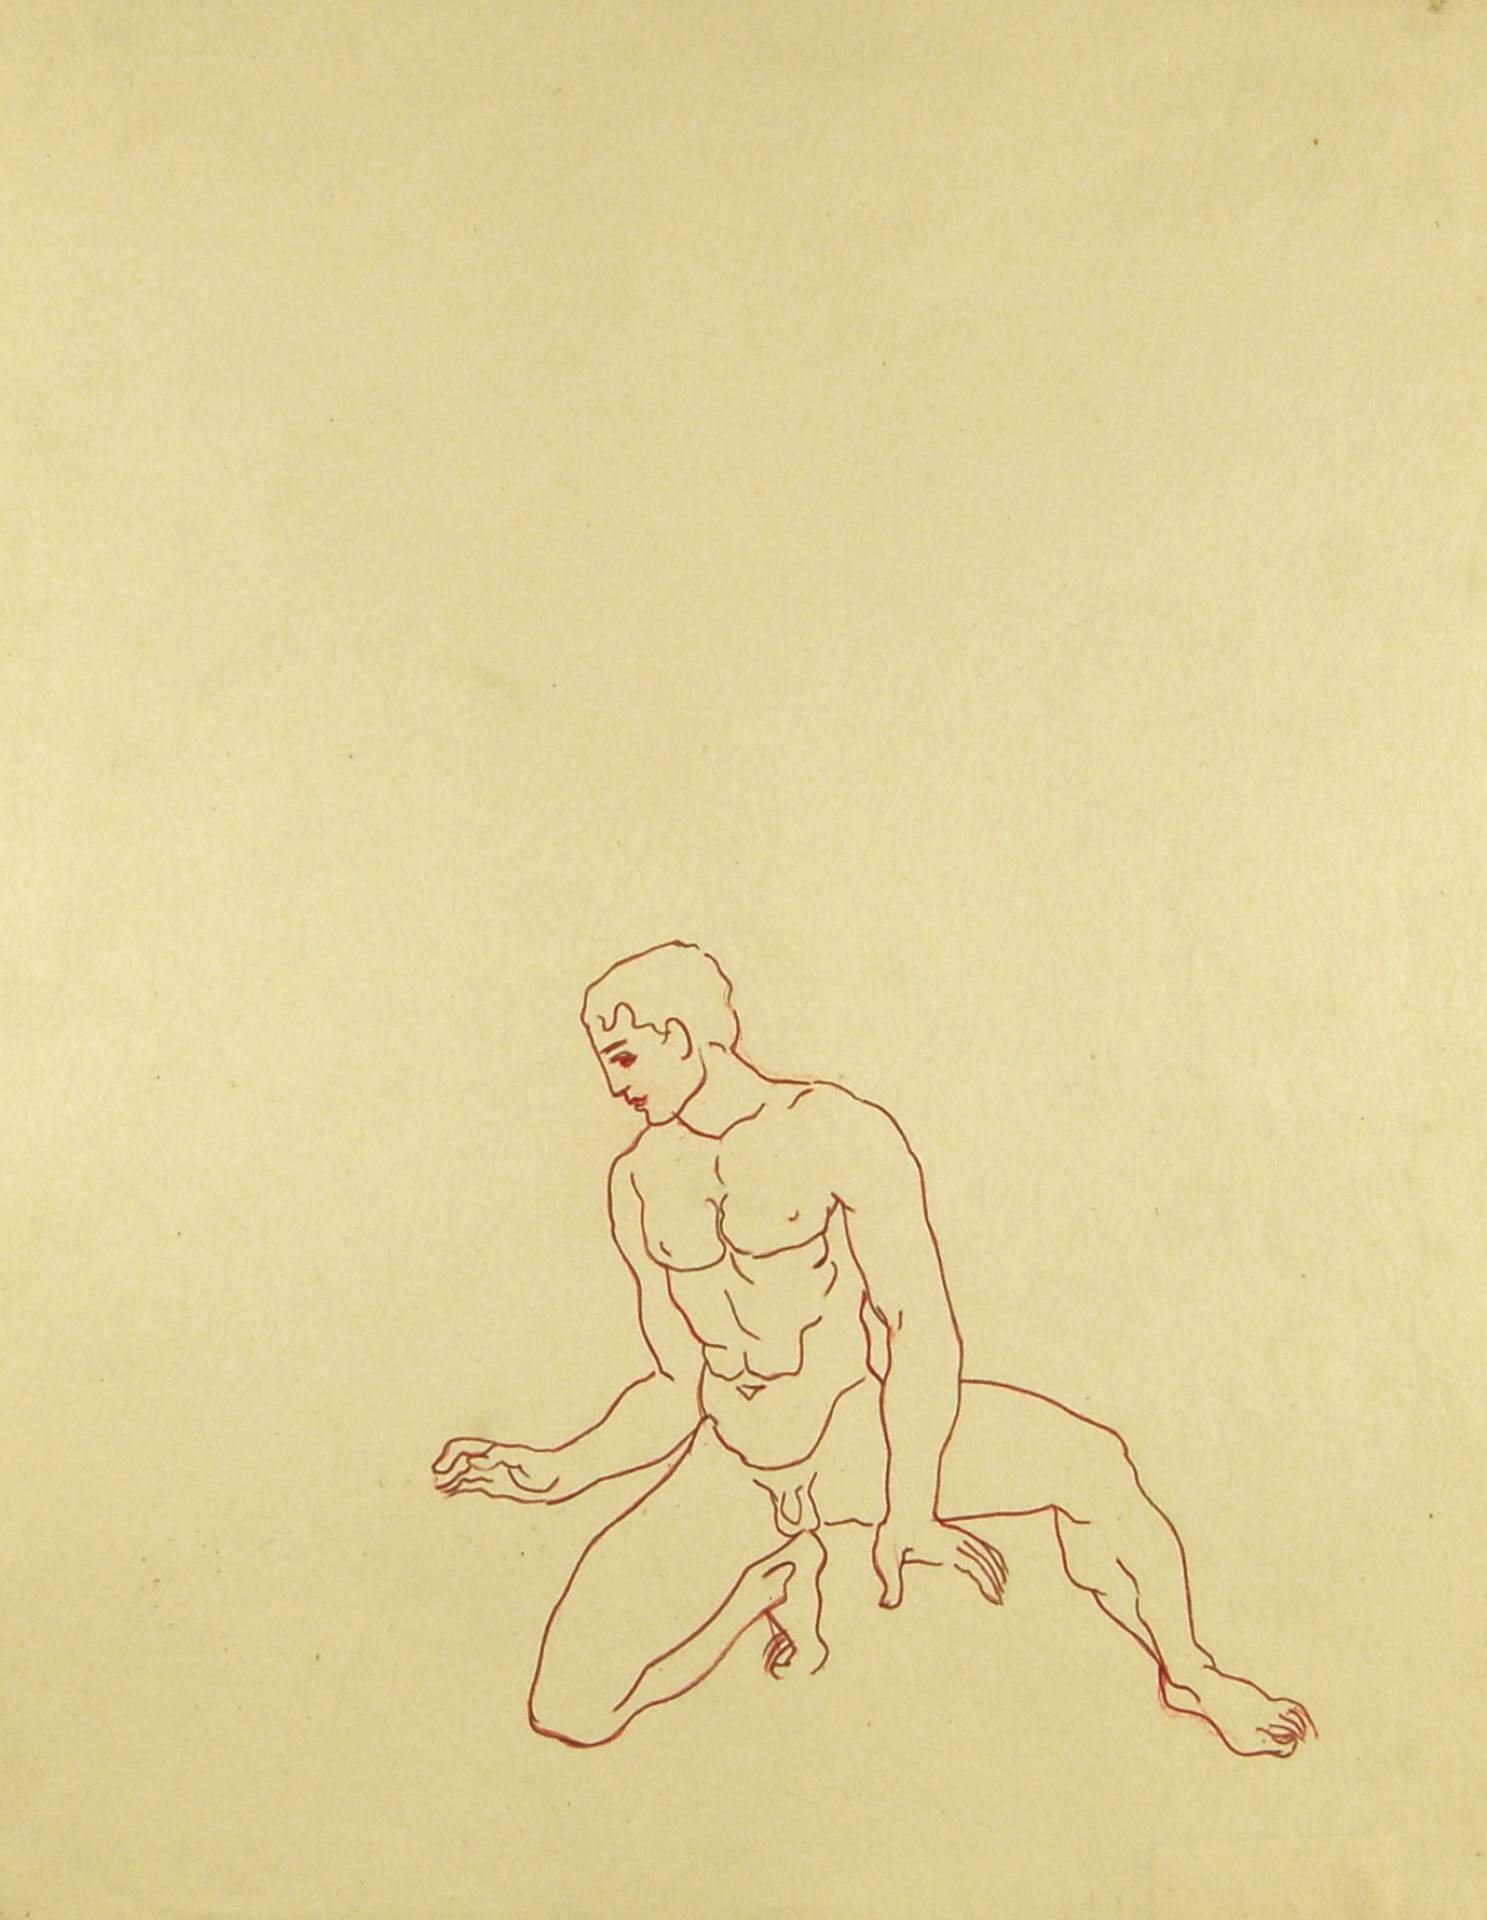 Male Nude, Kneelign on Hunches